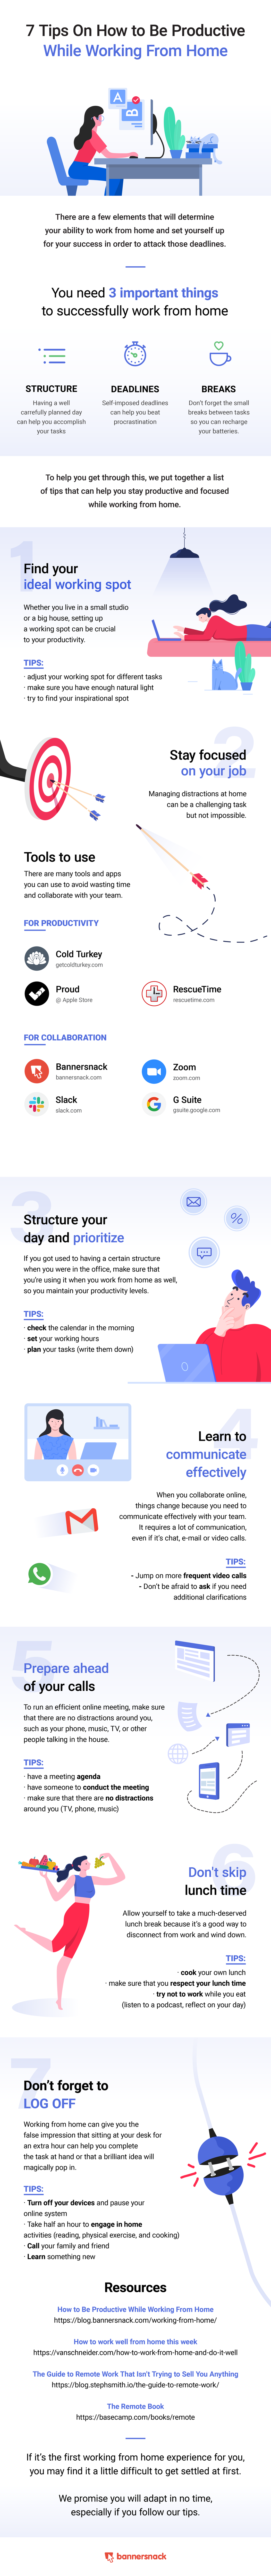 Infographic: How to be productive while working from home